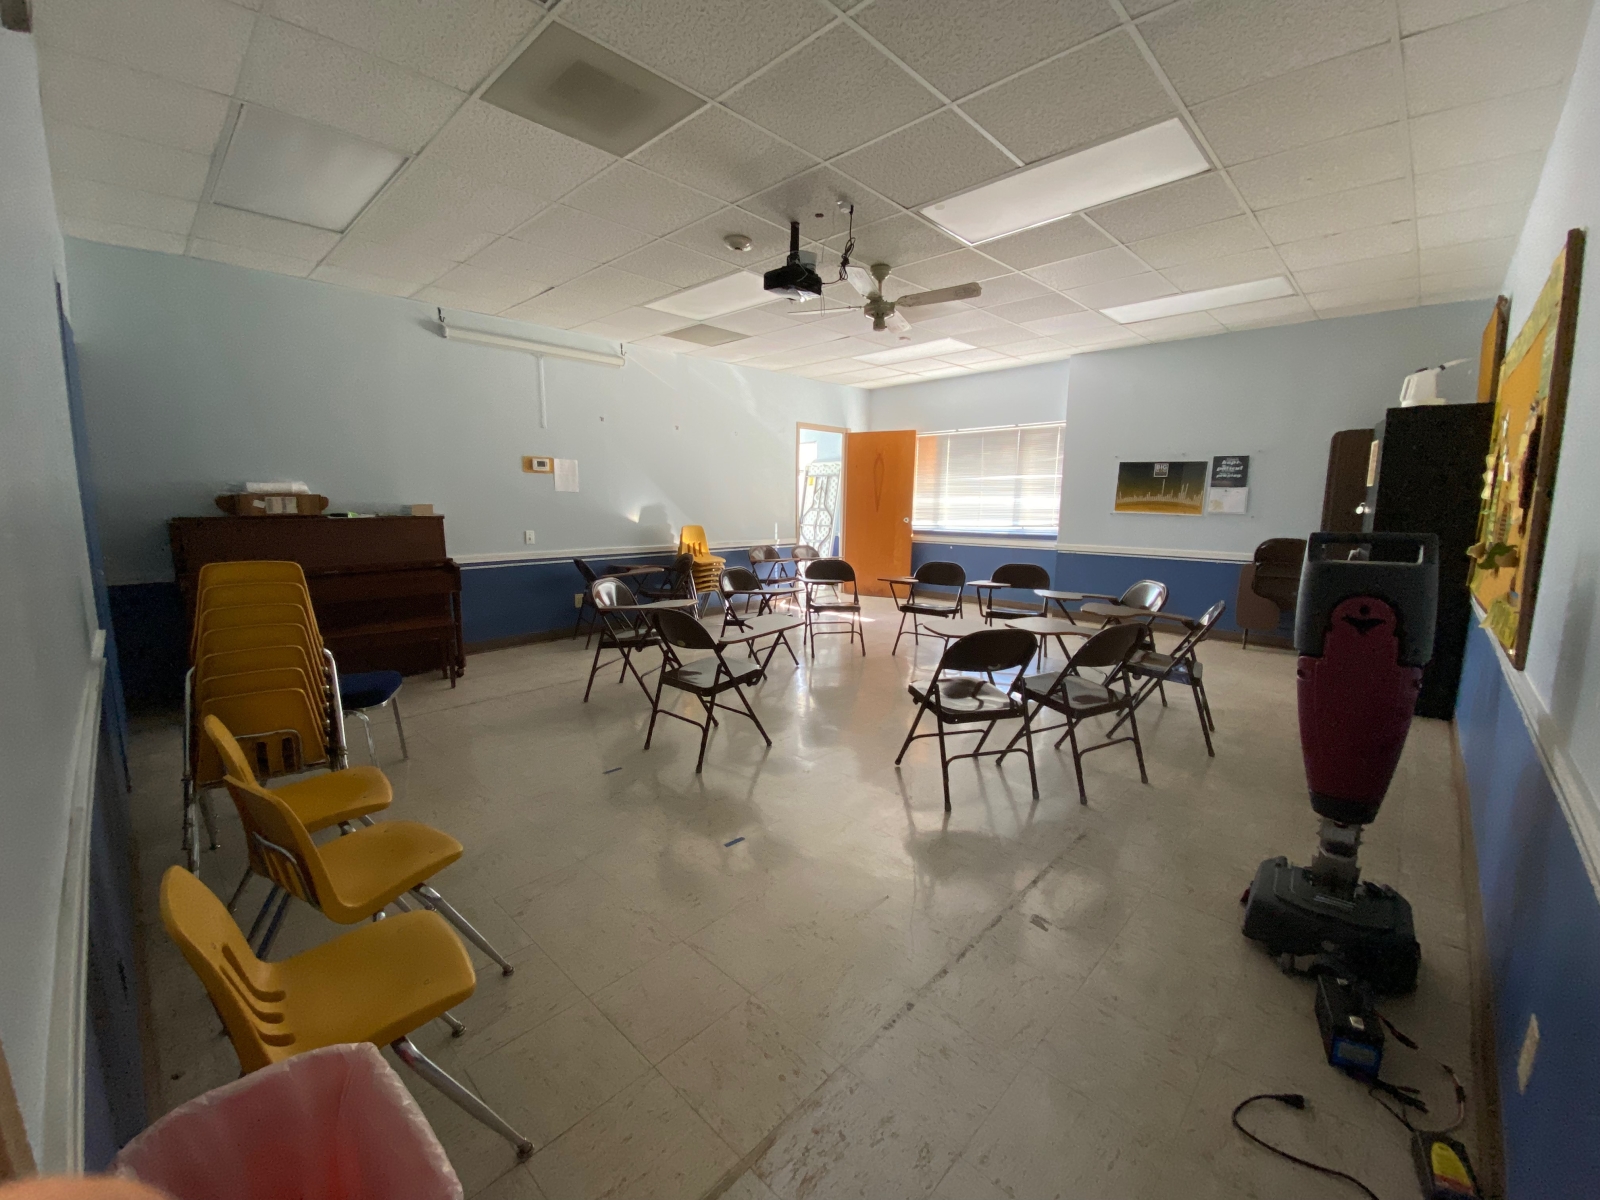 Room 201 has a piano, some student desks, and a projector/screen.